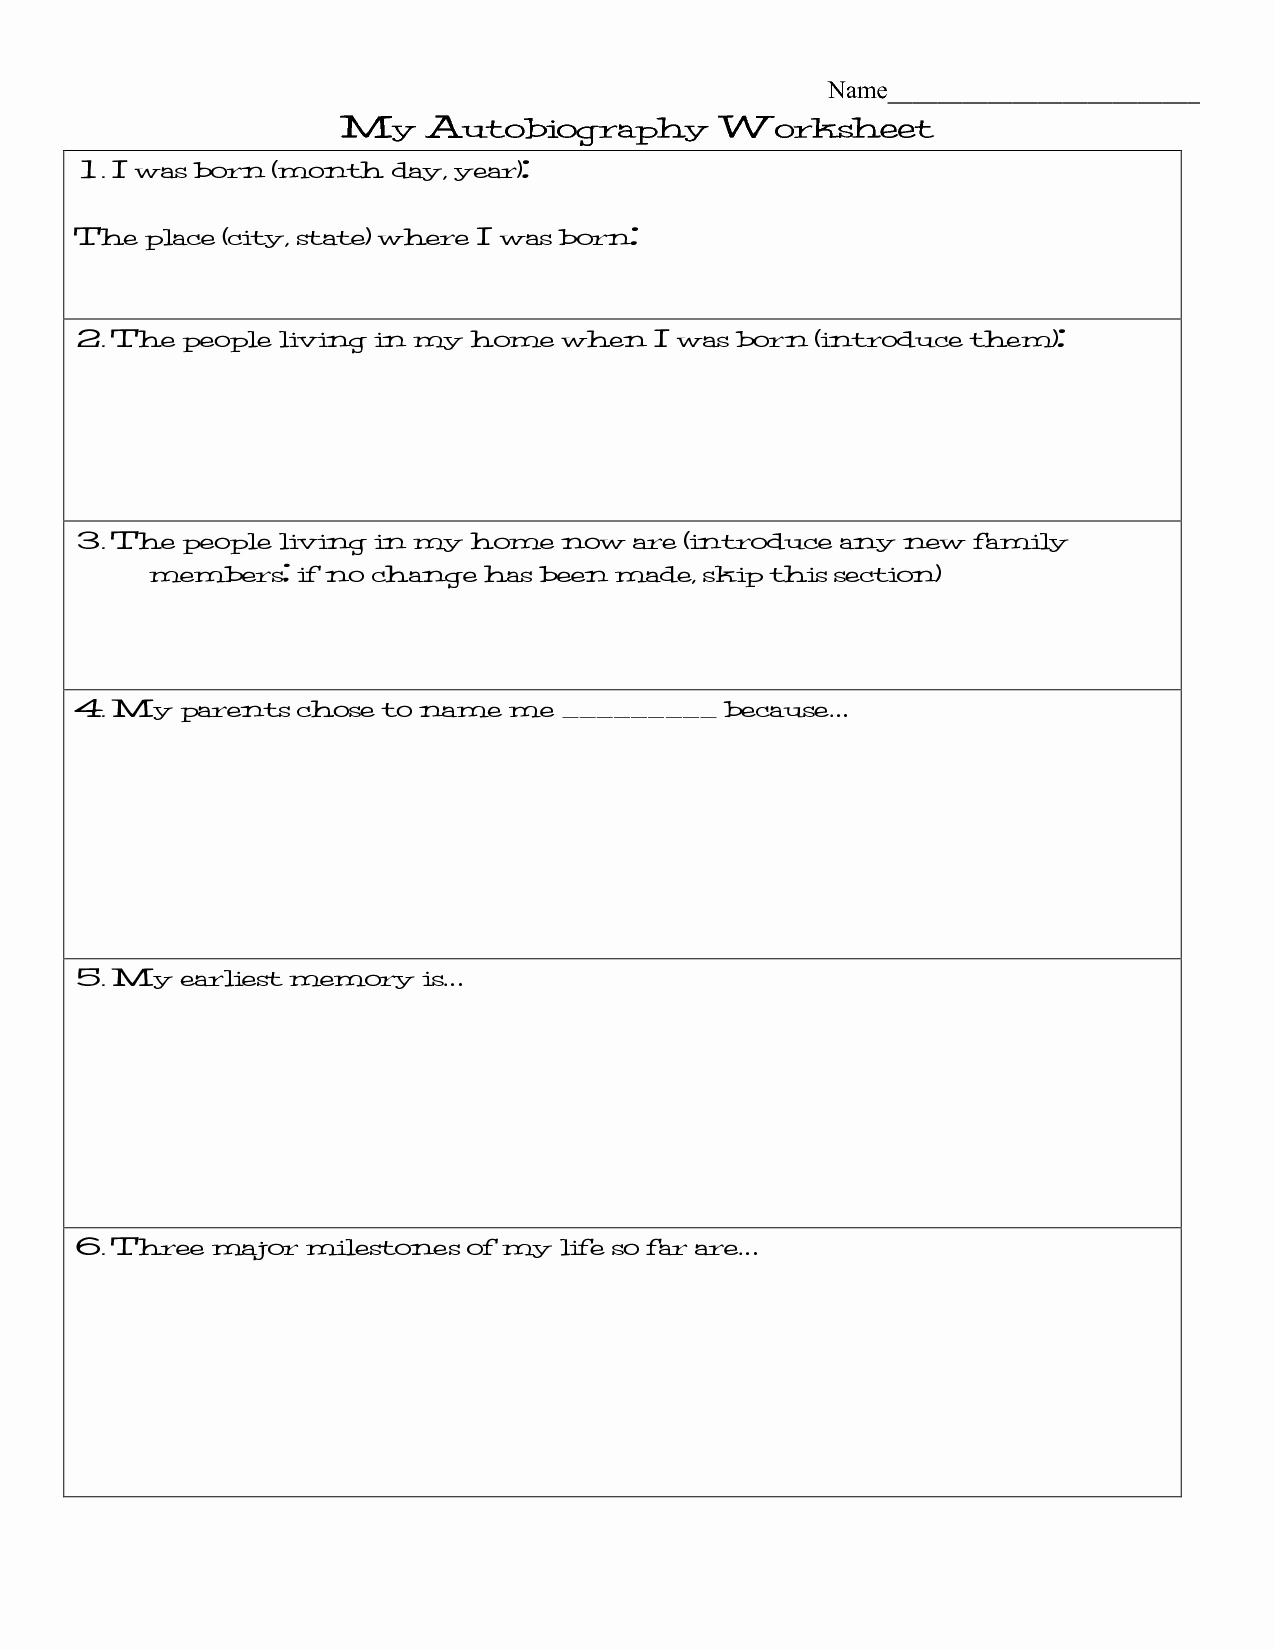 Autobiography Template for Elementary Students Best Of Autobiography Questions Worksheet the Best Worksheets